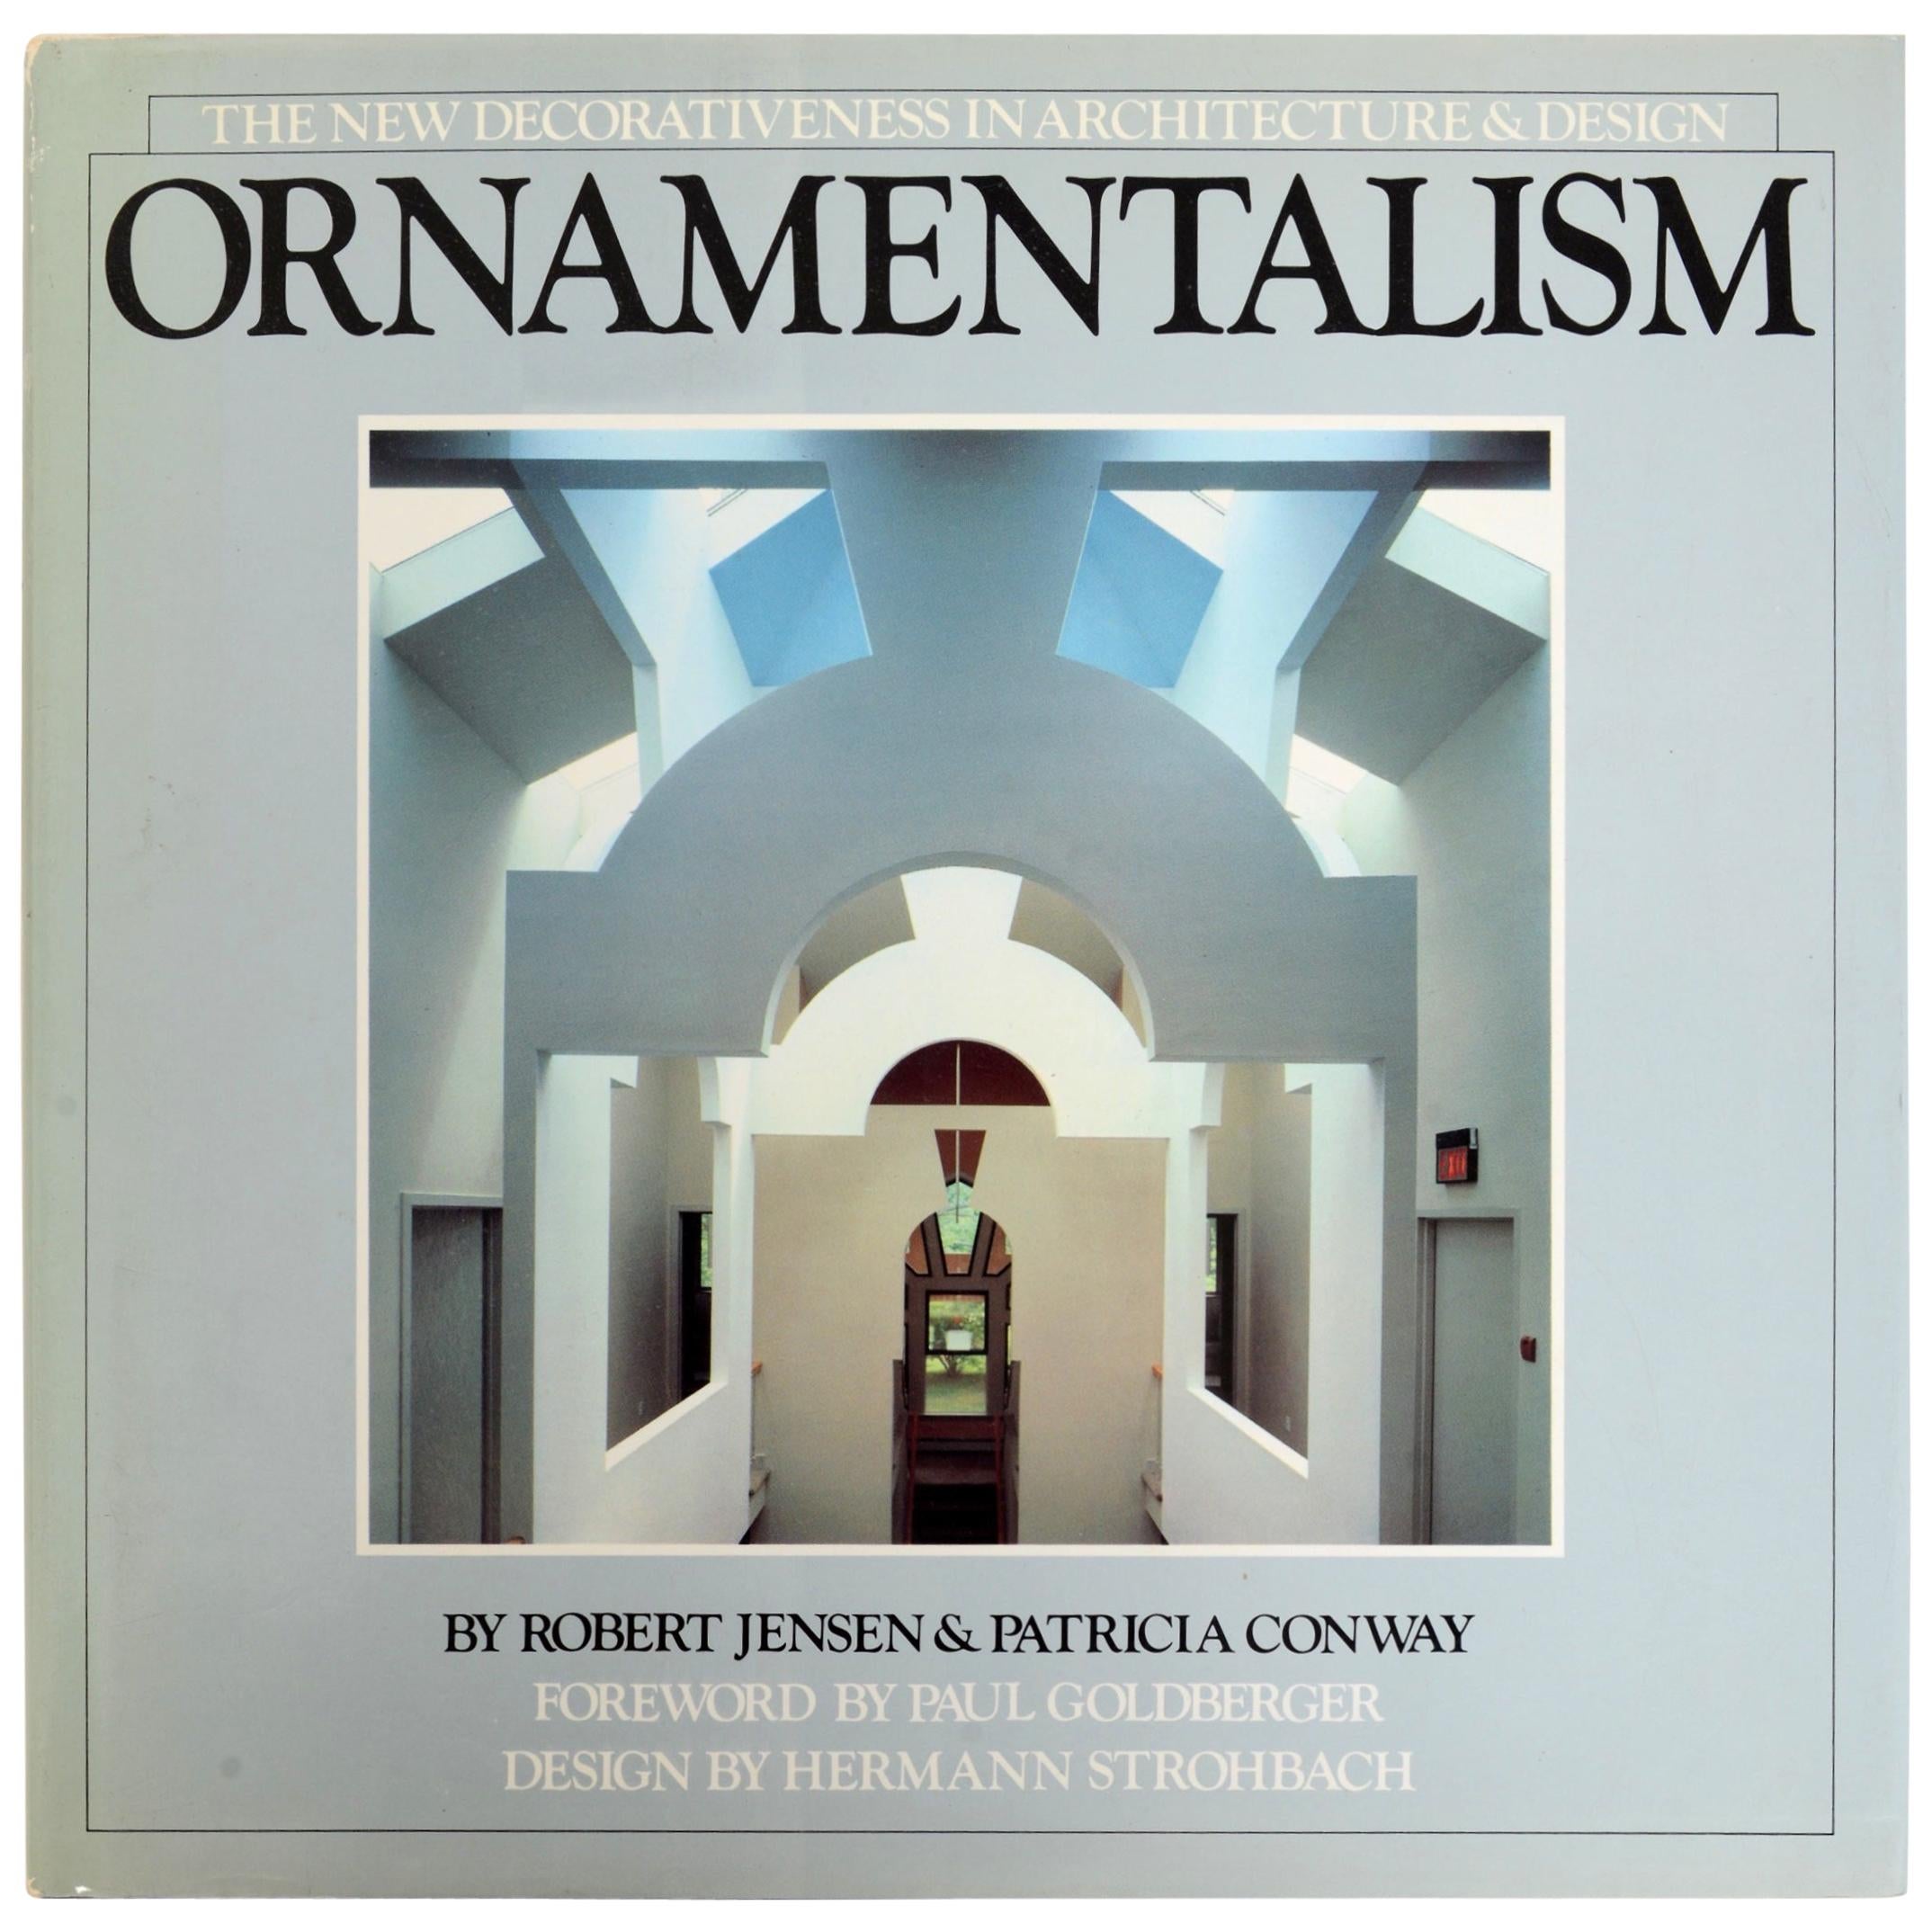 Ornamentalismus The New Decorativeness in Architecture and Design, Stated 1st Ed